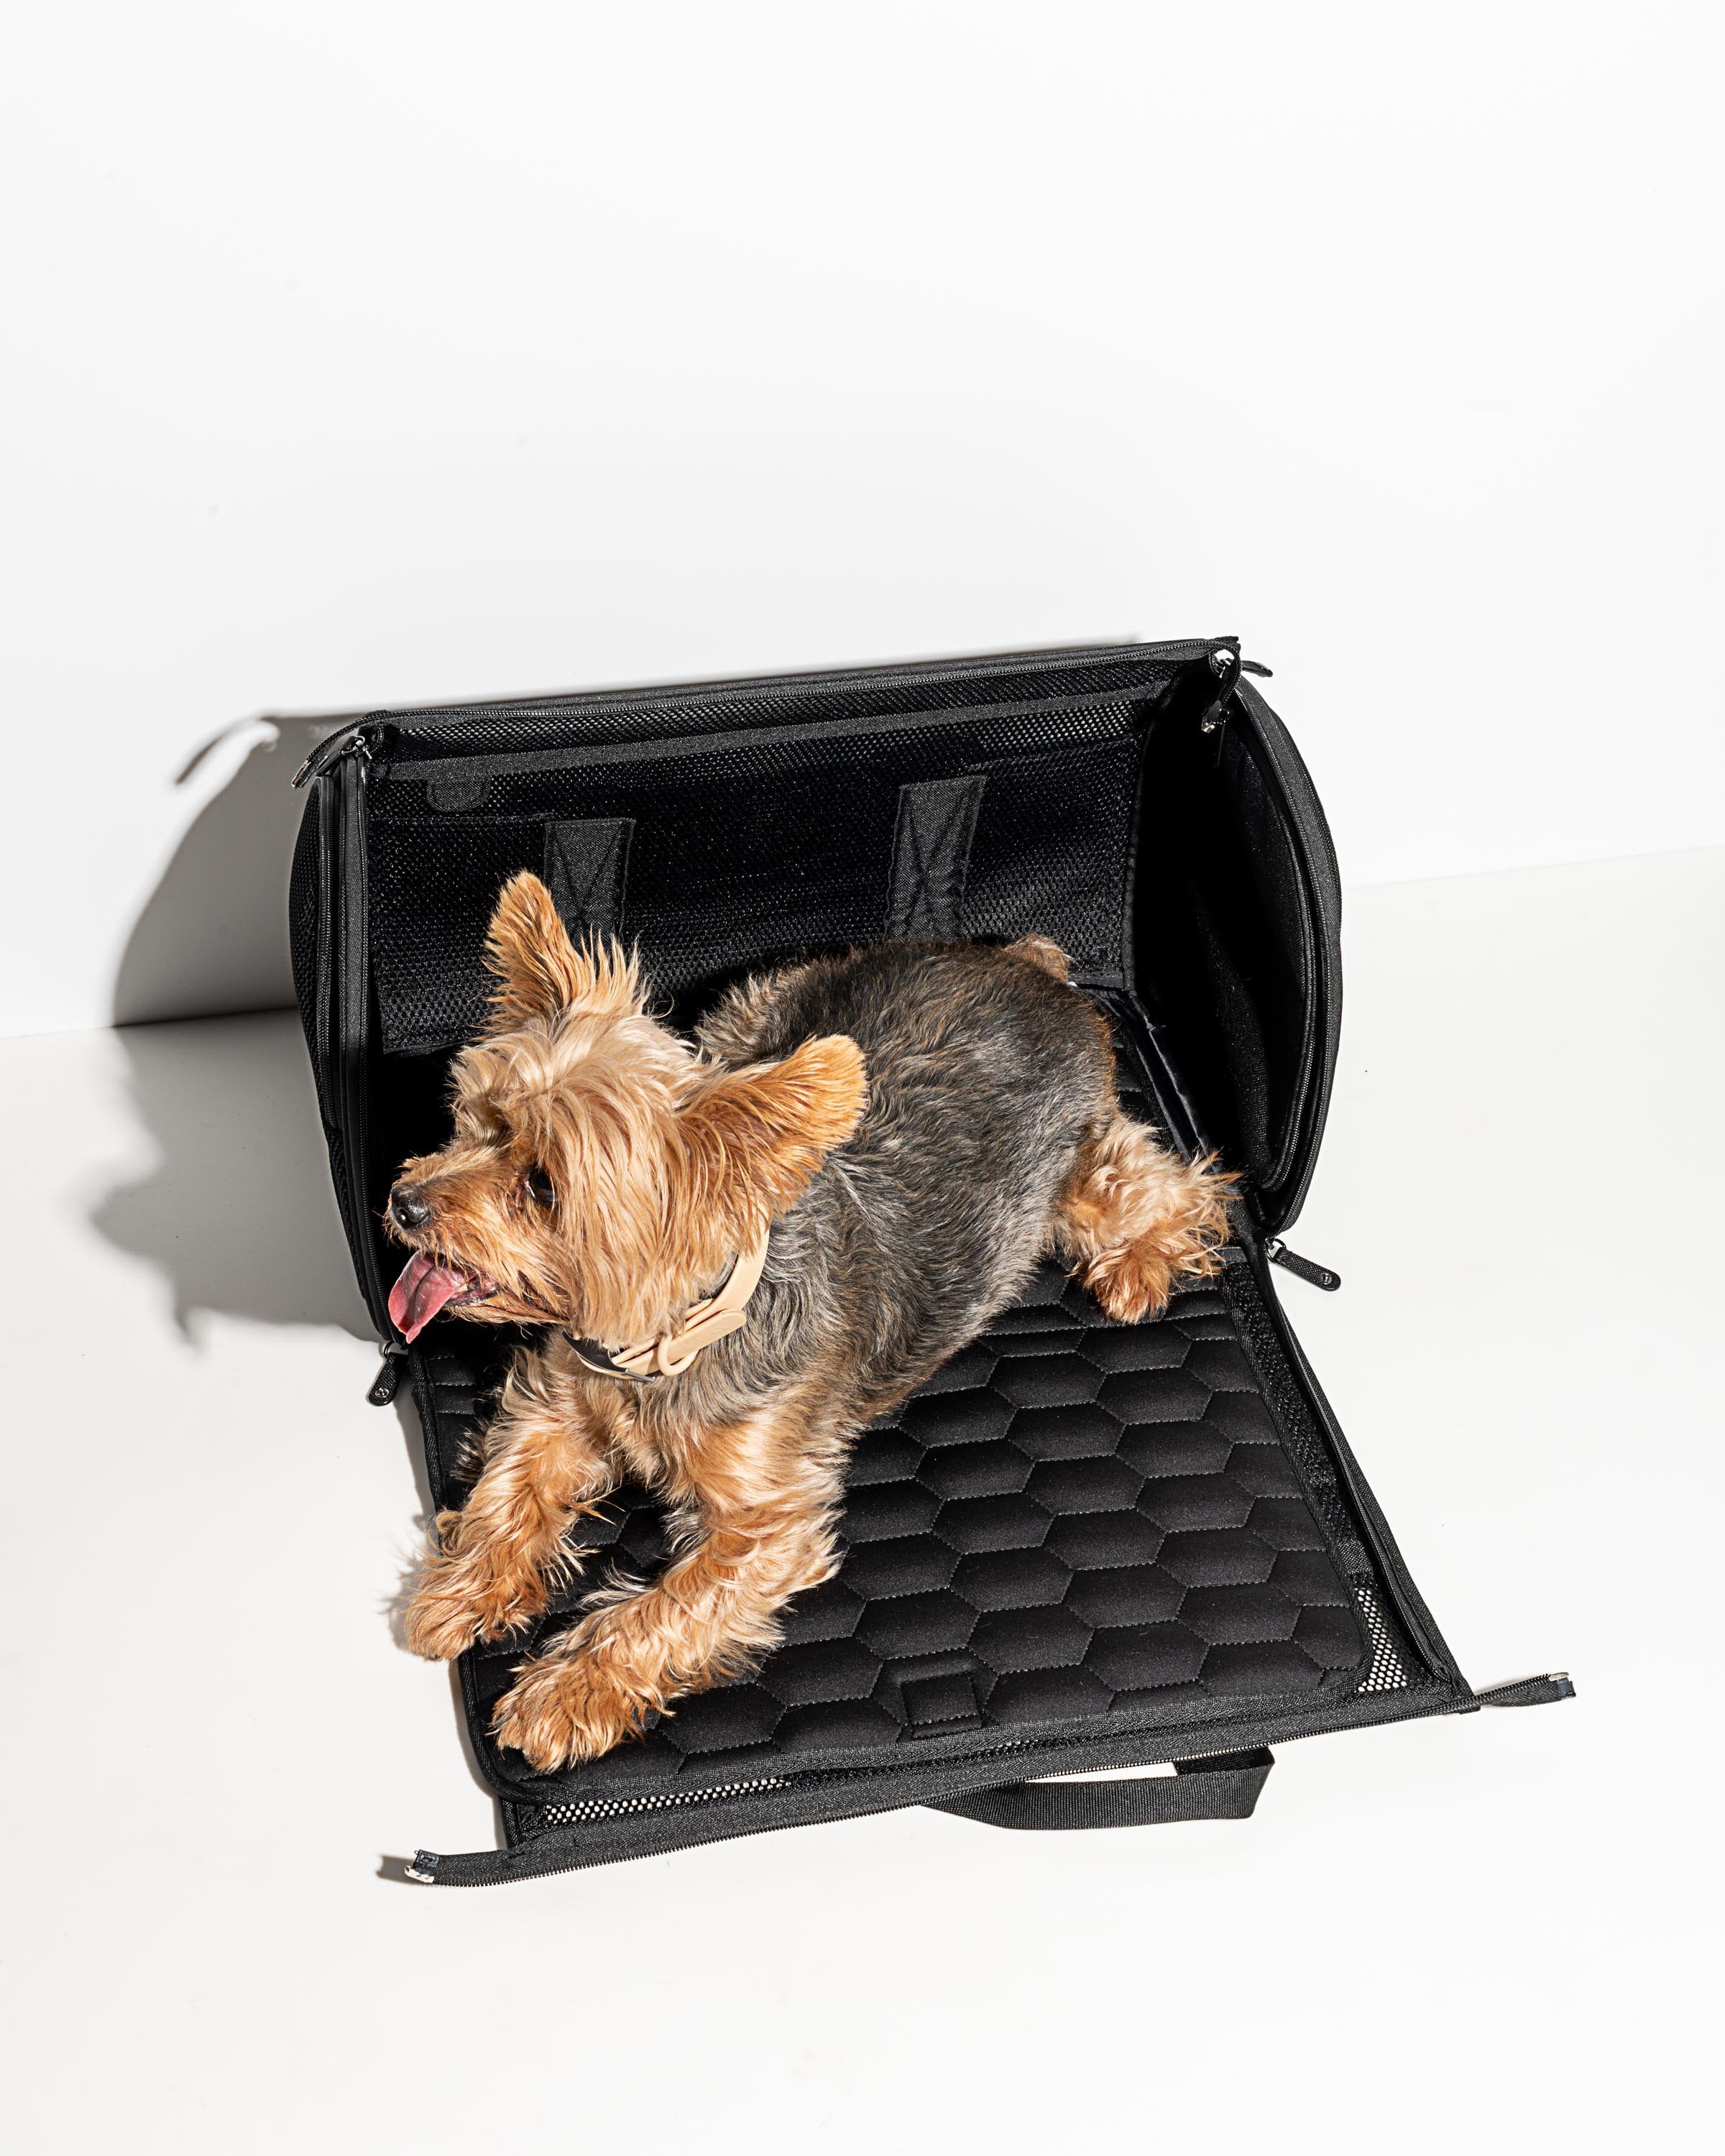 QualiTrue Pet Carrier Travel Bag Dog Cats Rabbits Airline Approved  Breathable Mesh for Air Black Airline Pet Carrier Price in India - Buy  QualiTrue Pet Carrier Travel Bag Dog Cats Rabbits Airline